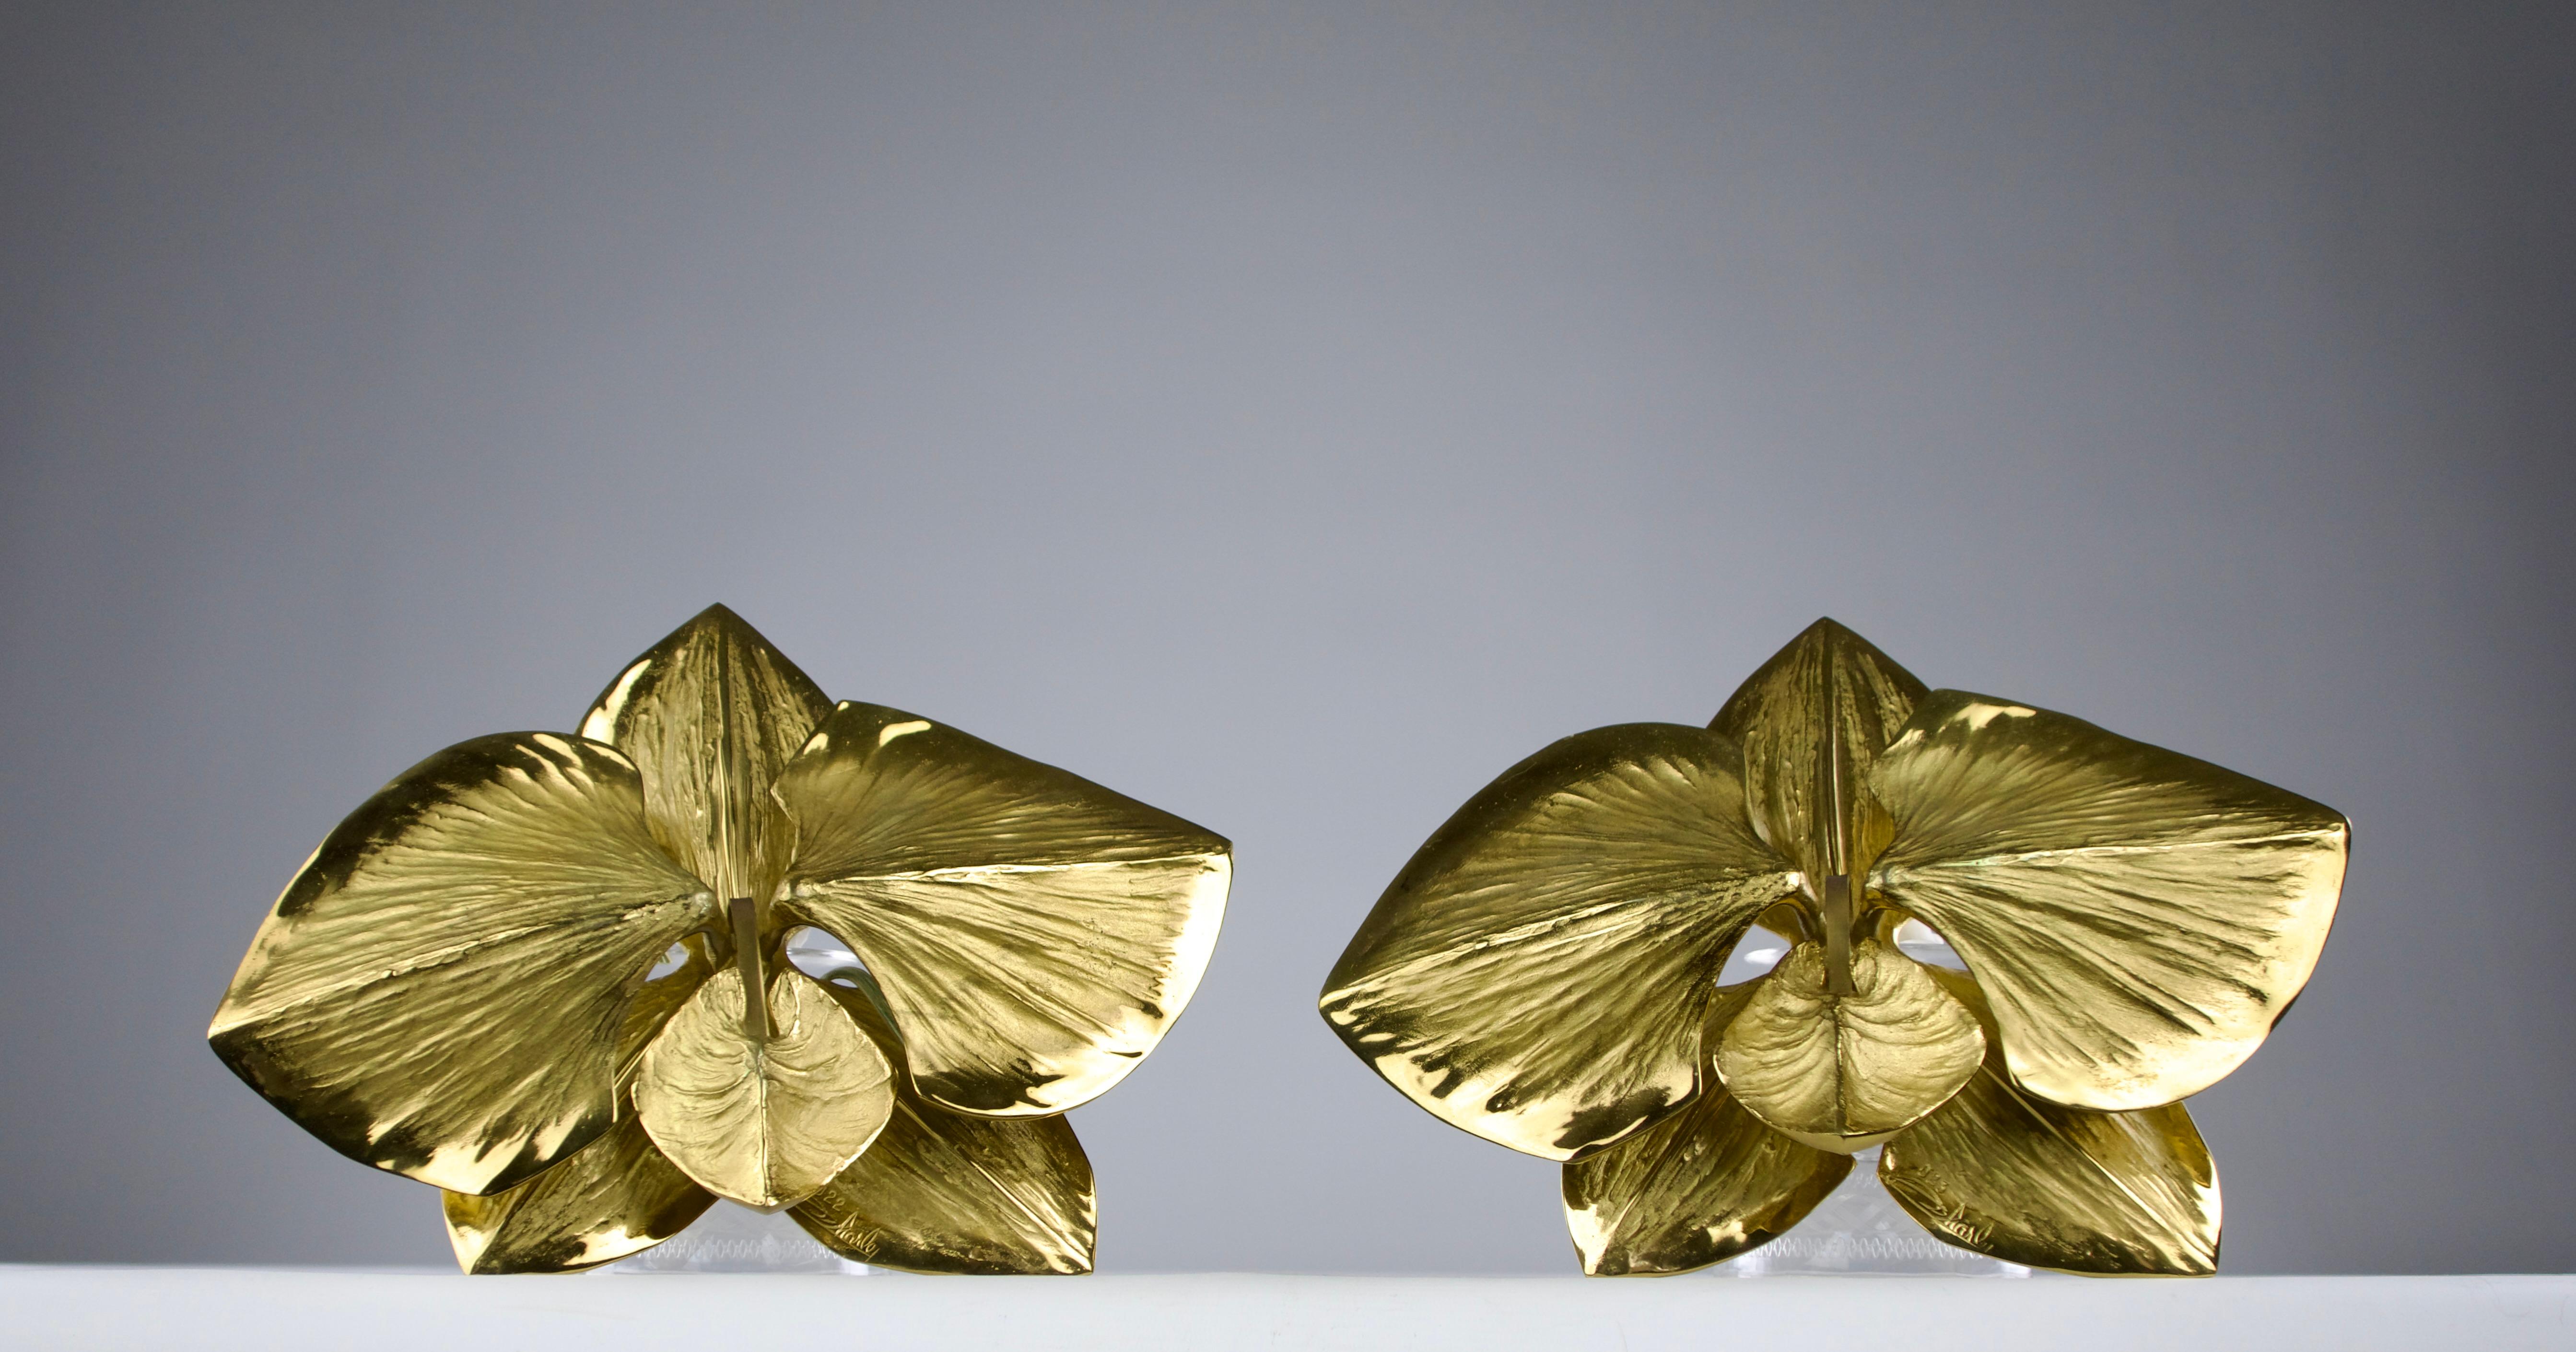 Superb Maison Charles Orchid wall light sconces in golden polished brass, designed by Chrystiane Charles in the 1980s. Numbered 022 and 023. Signed Charles on the sconces and Maison Charles, Made in France on the back mounts.

In very good